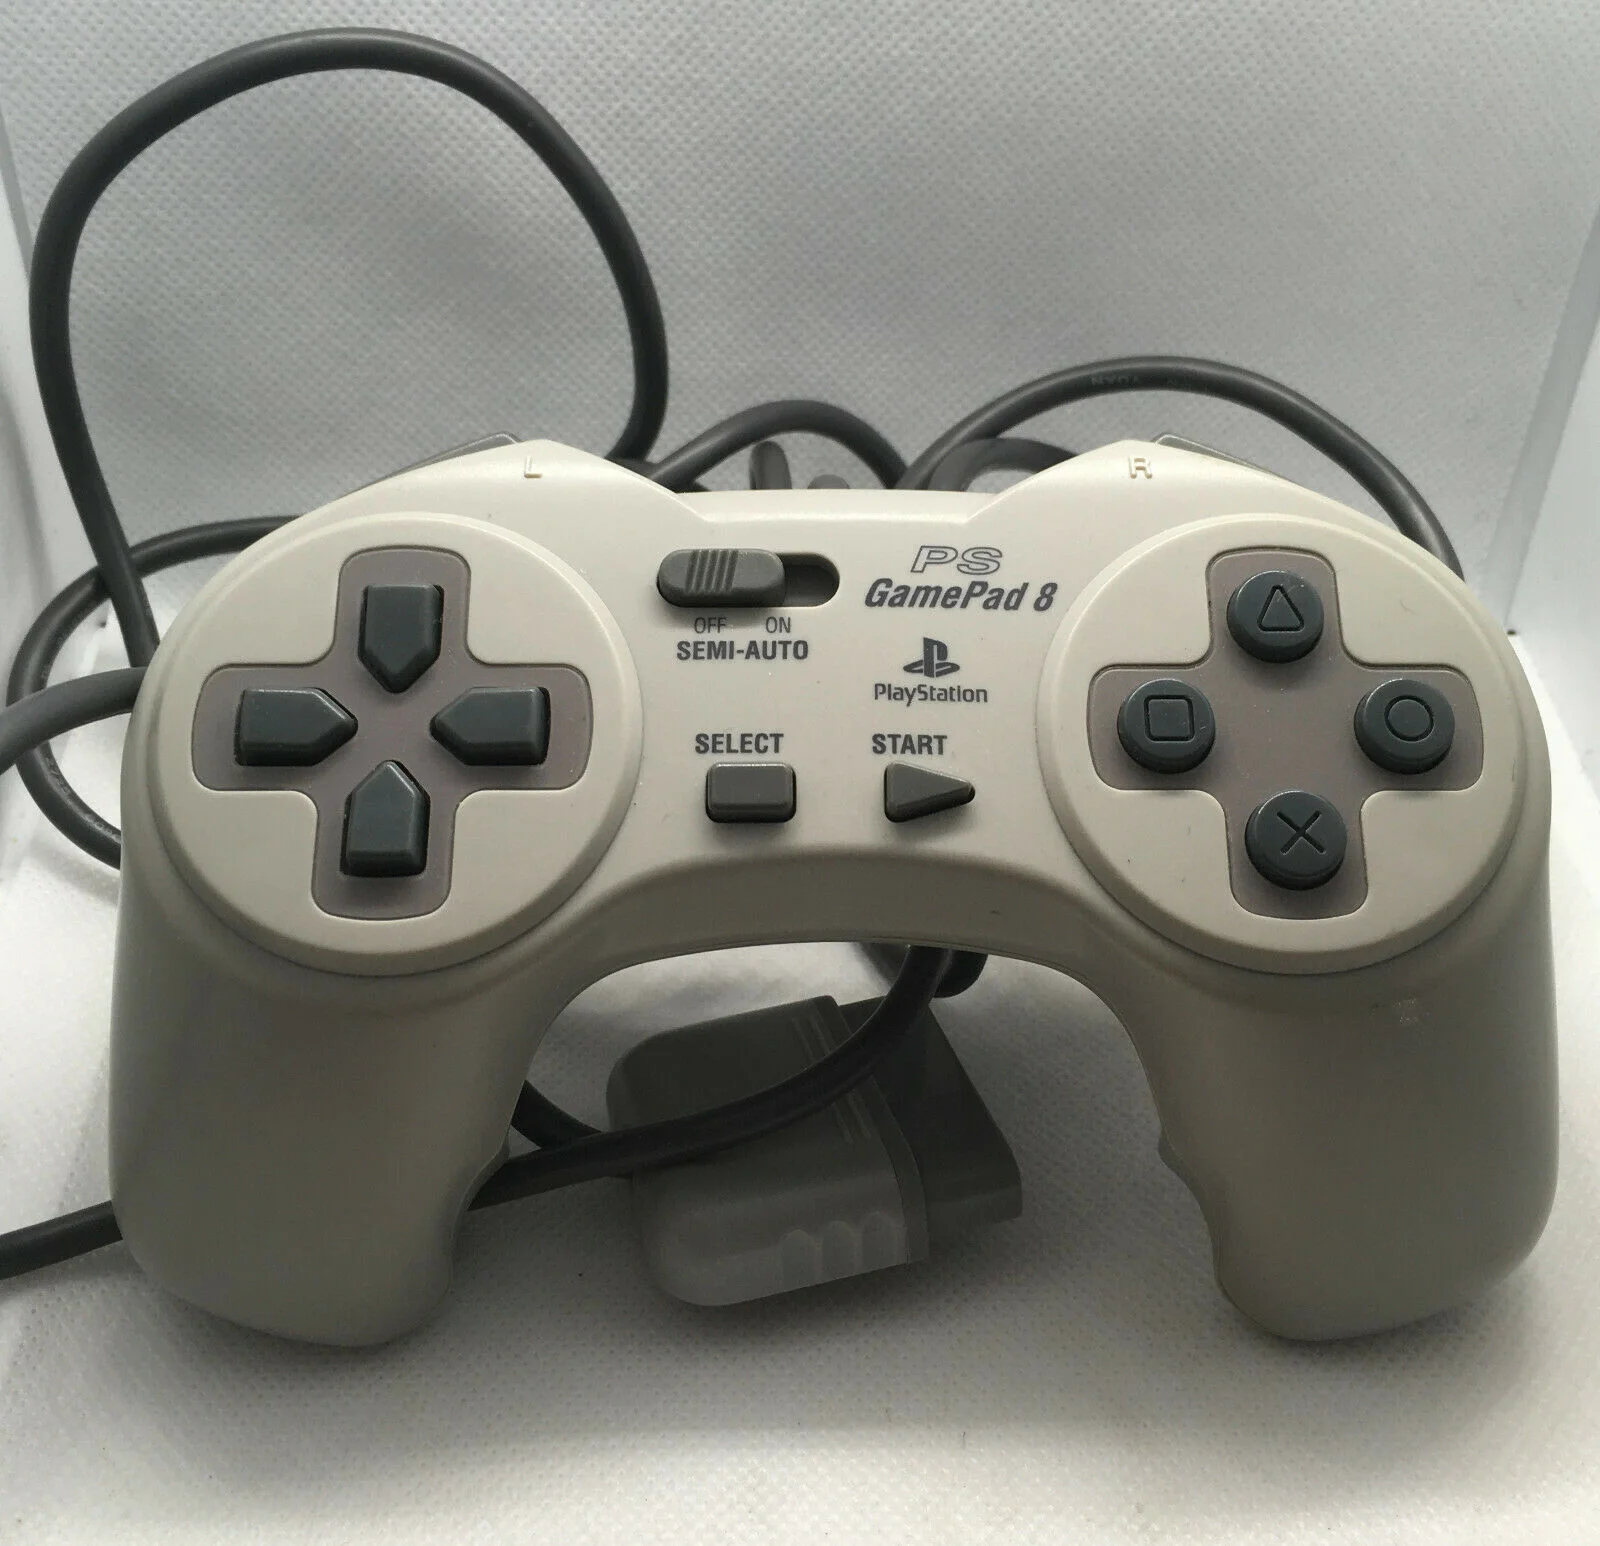  PS Gamepad 8 Performance P-100 Playstation Controller